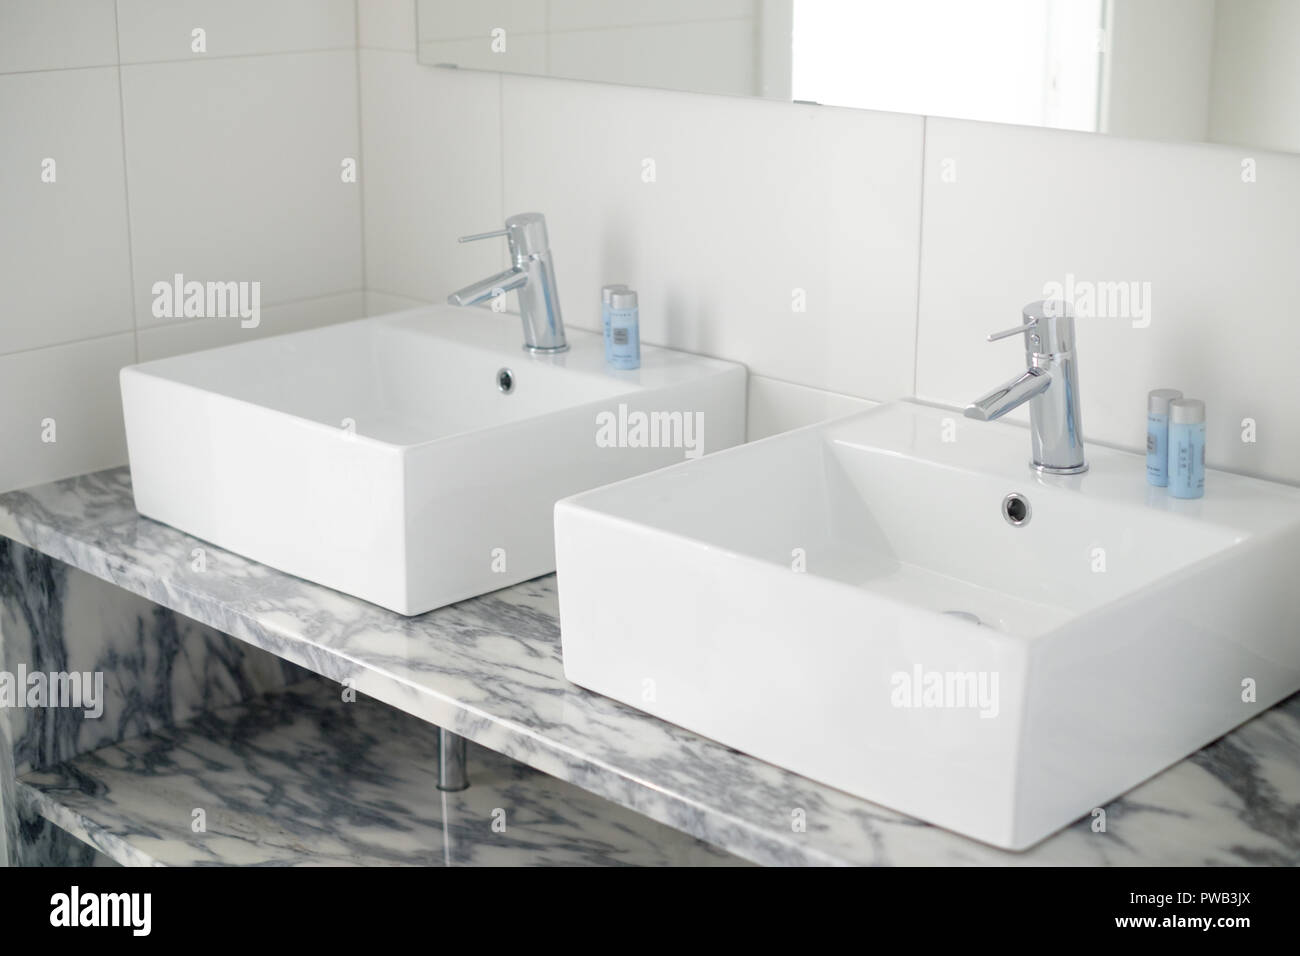 Bathroom with double his and hers basins Stock Photo - Alamy